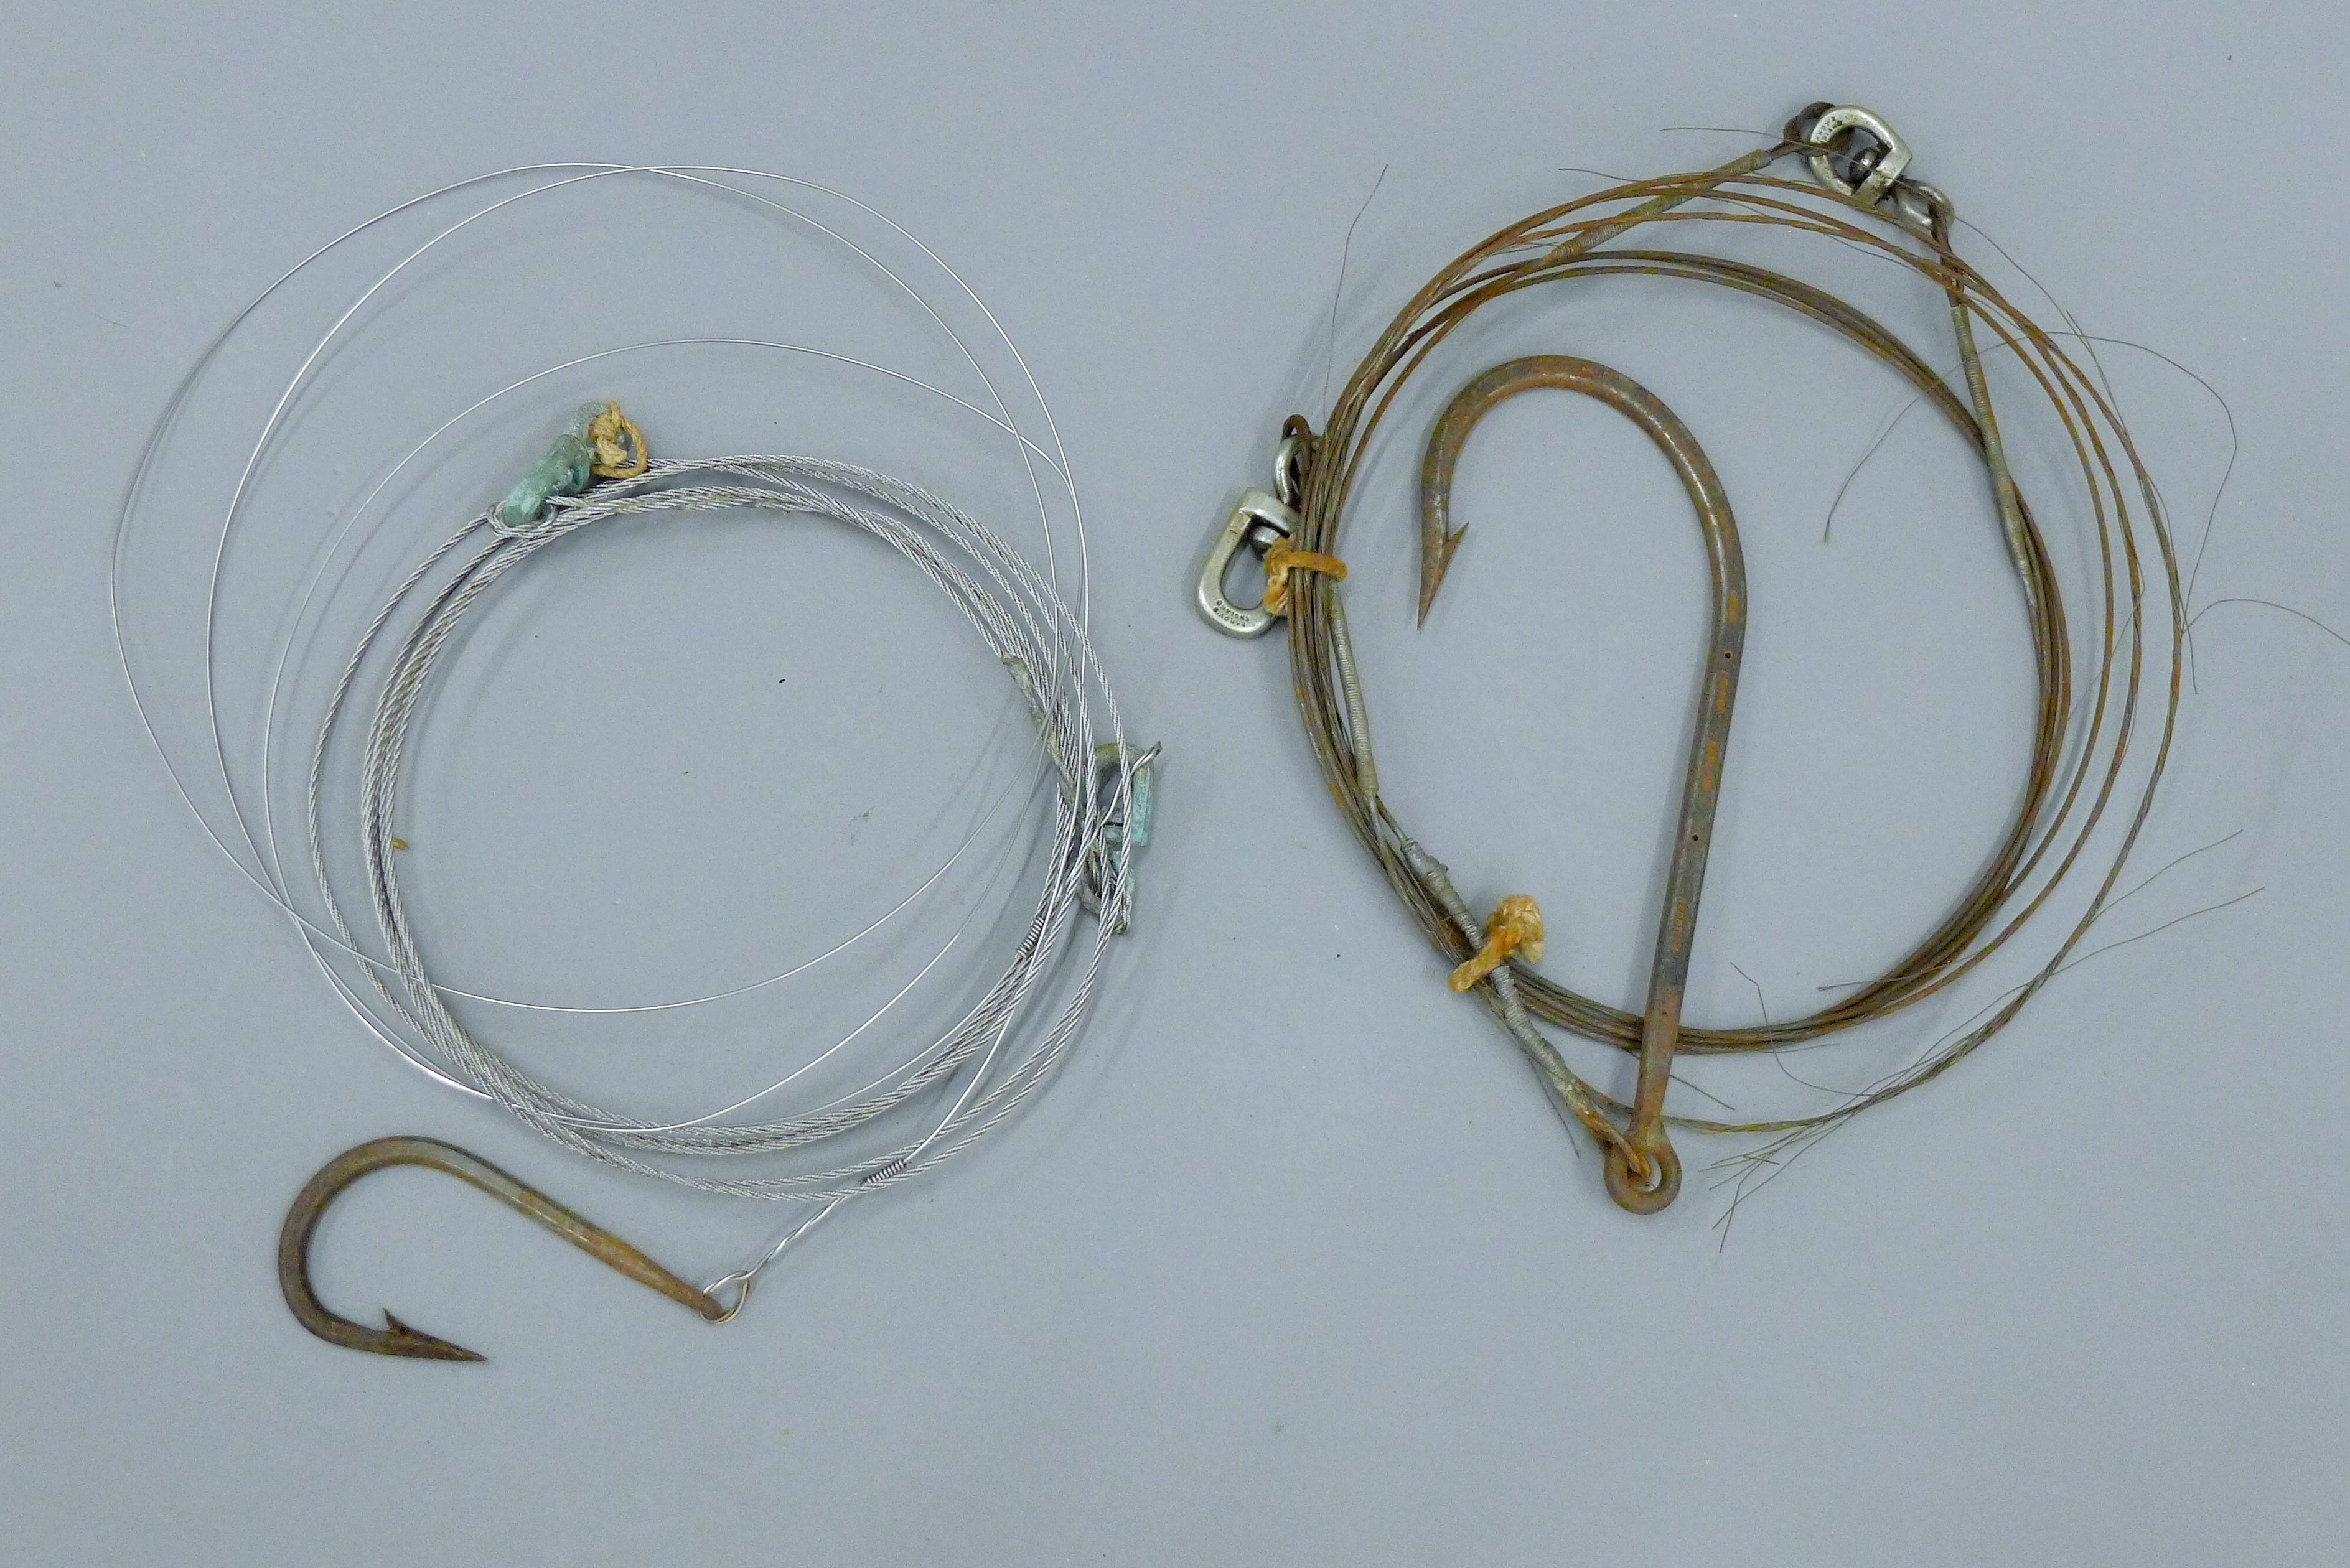 Two Hardy Brothers big game deep sea wire traces, one with named Hardy swivels.